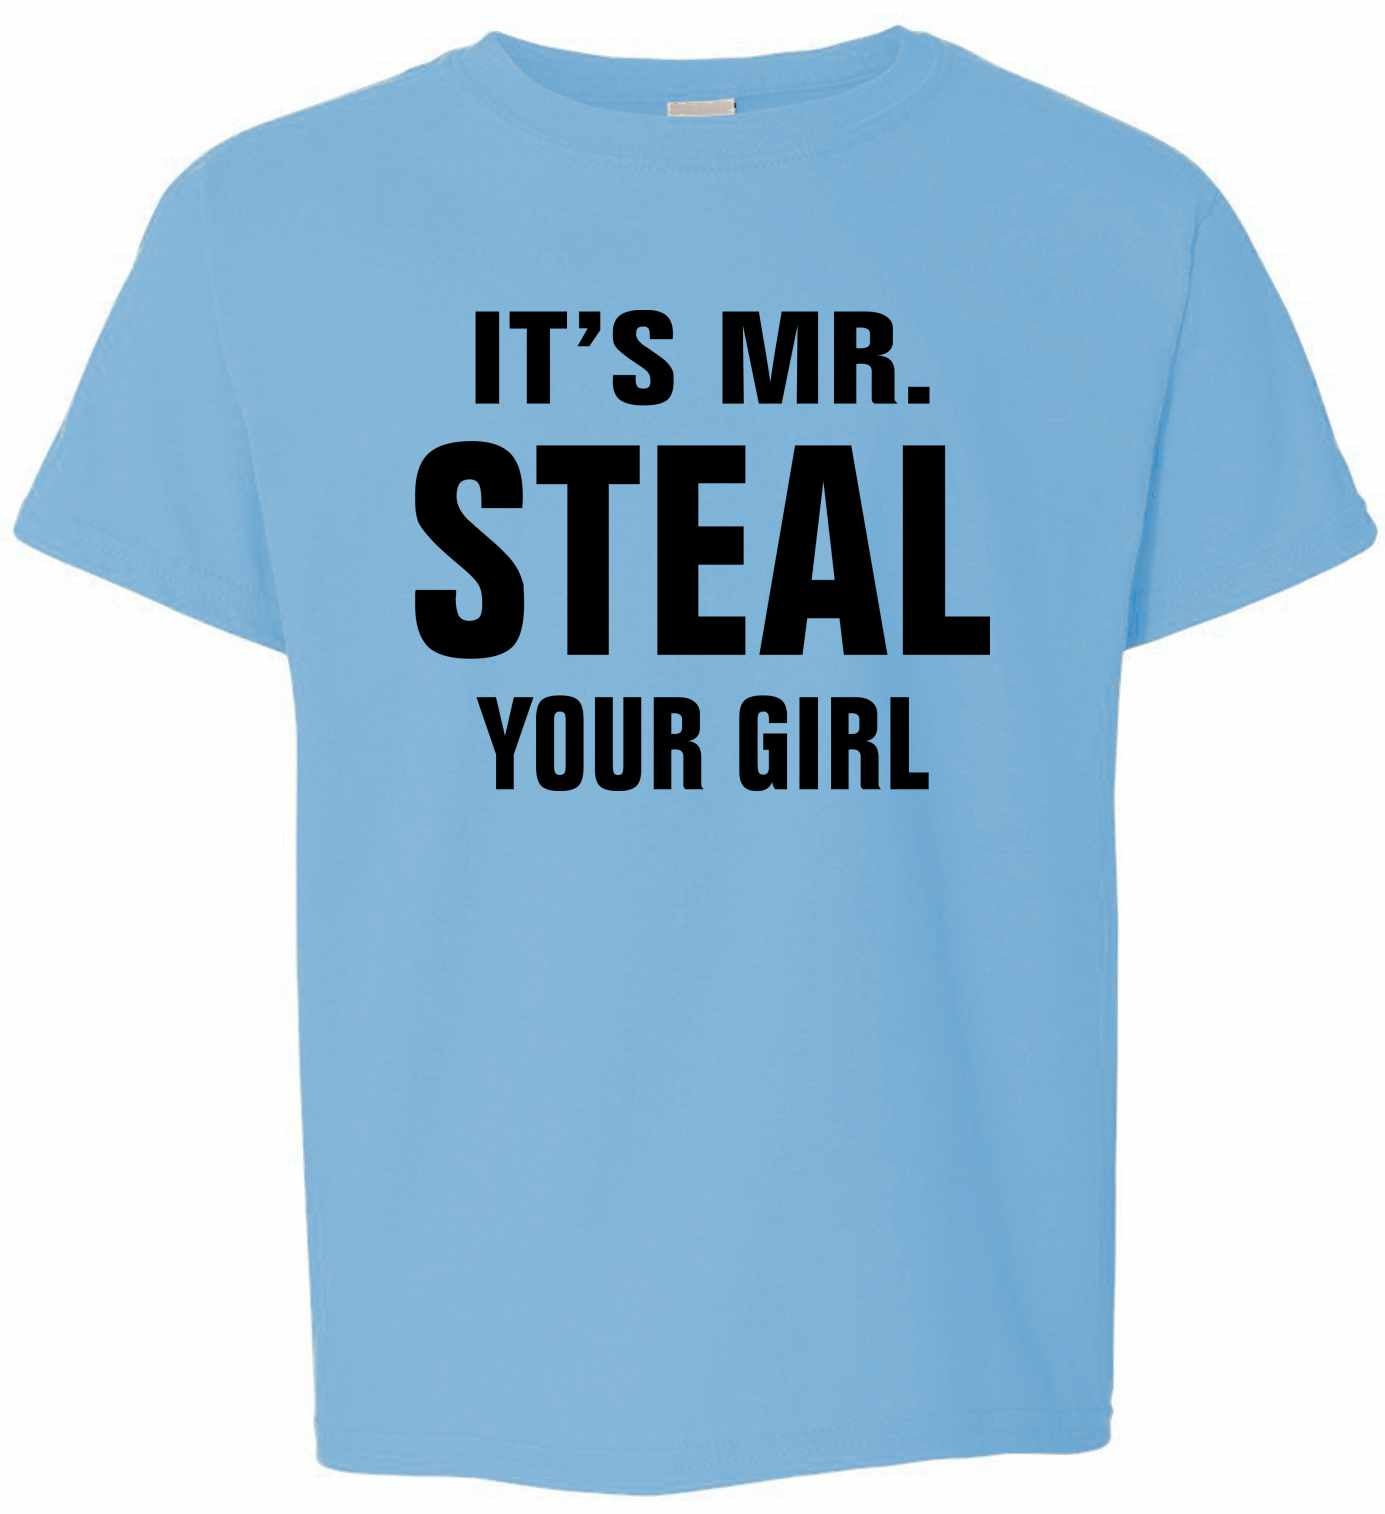 IT'S MR. STEAL YOUR GIRL on Kids T-Shirt (#906-201)